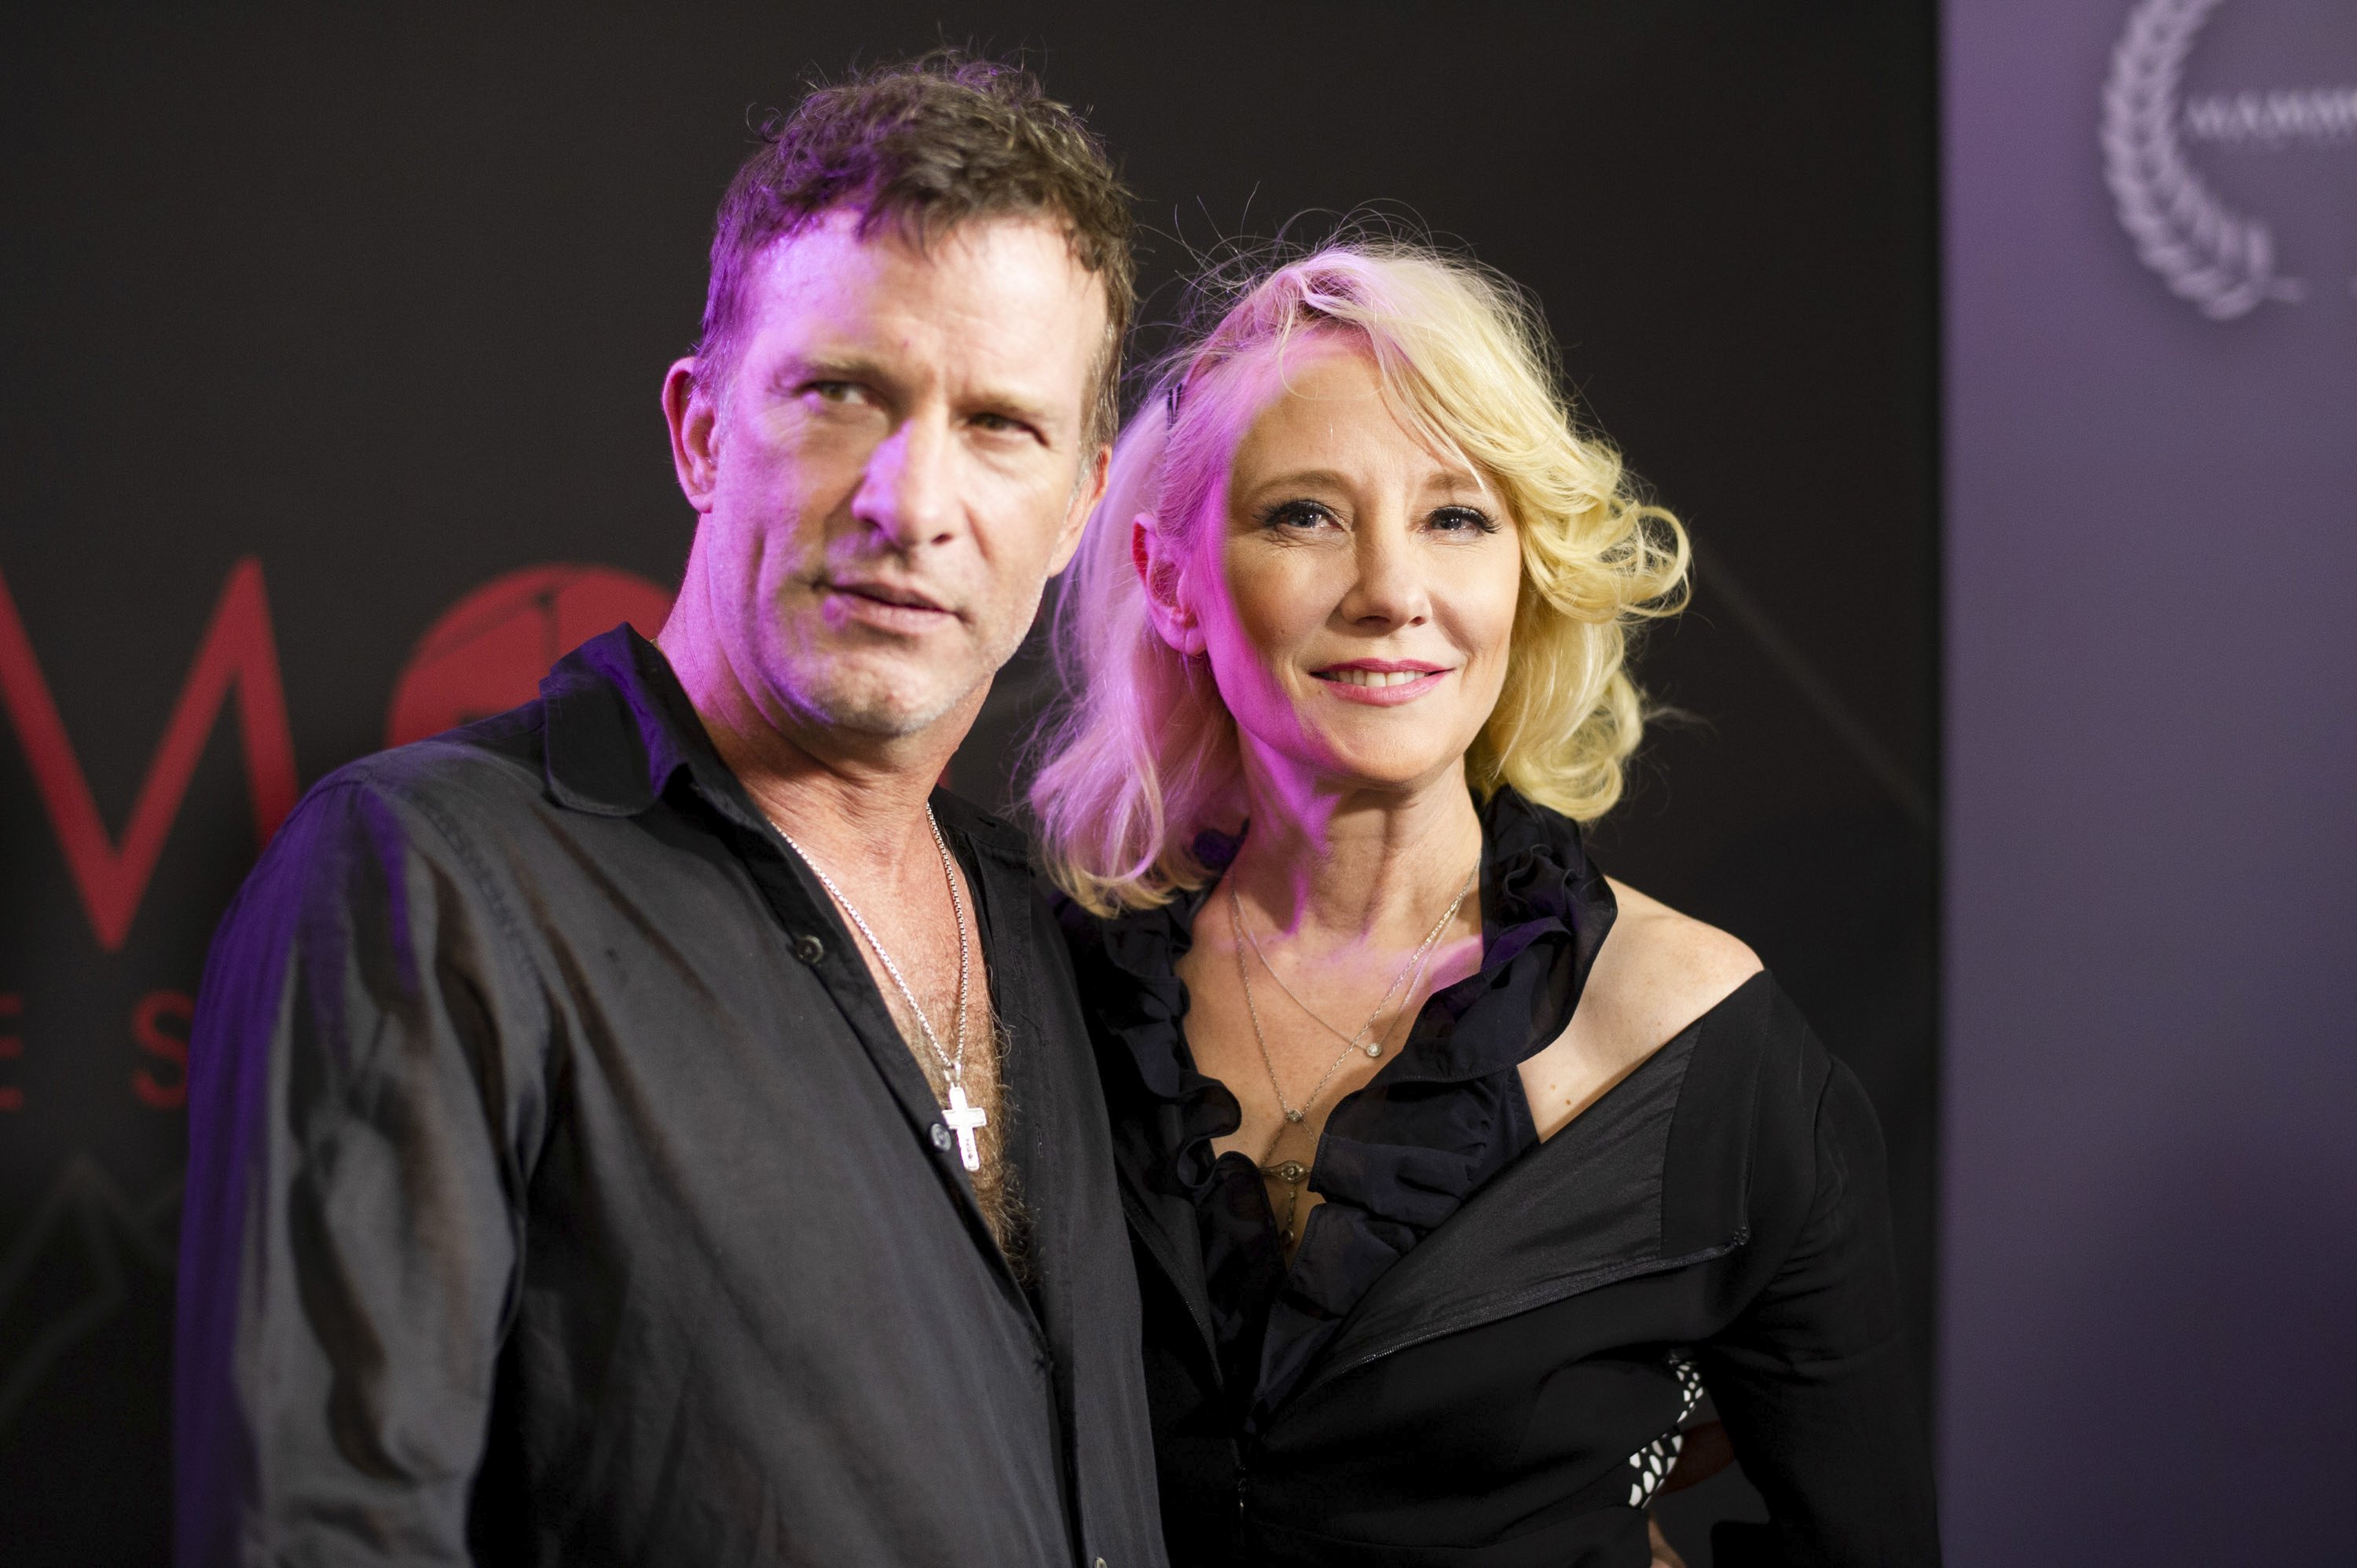 Thomas Jane and Anne Heche at the 3rd Annual Mammoth Film Festival on February 28, 2020, in Mammoth Lakes, California. | Source: Getty Images